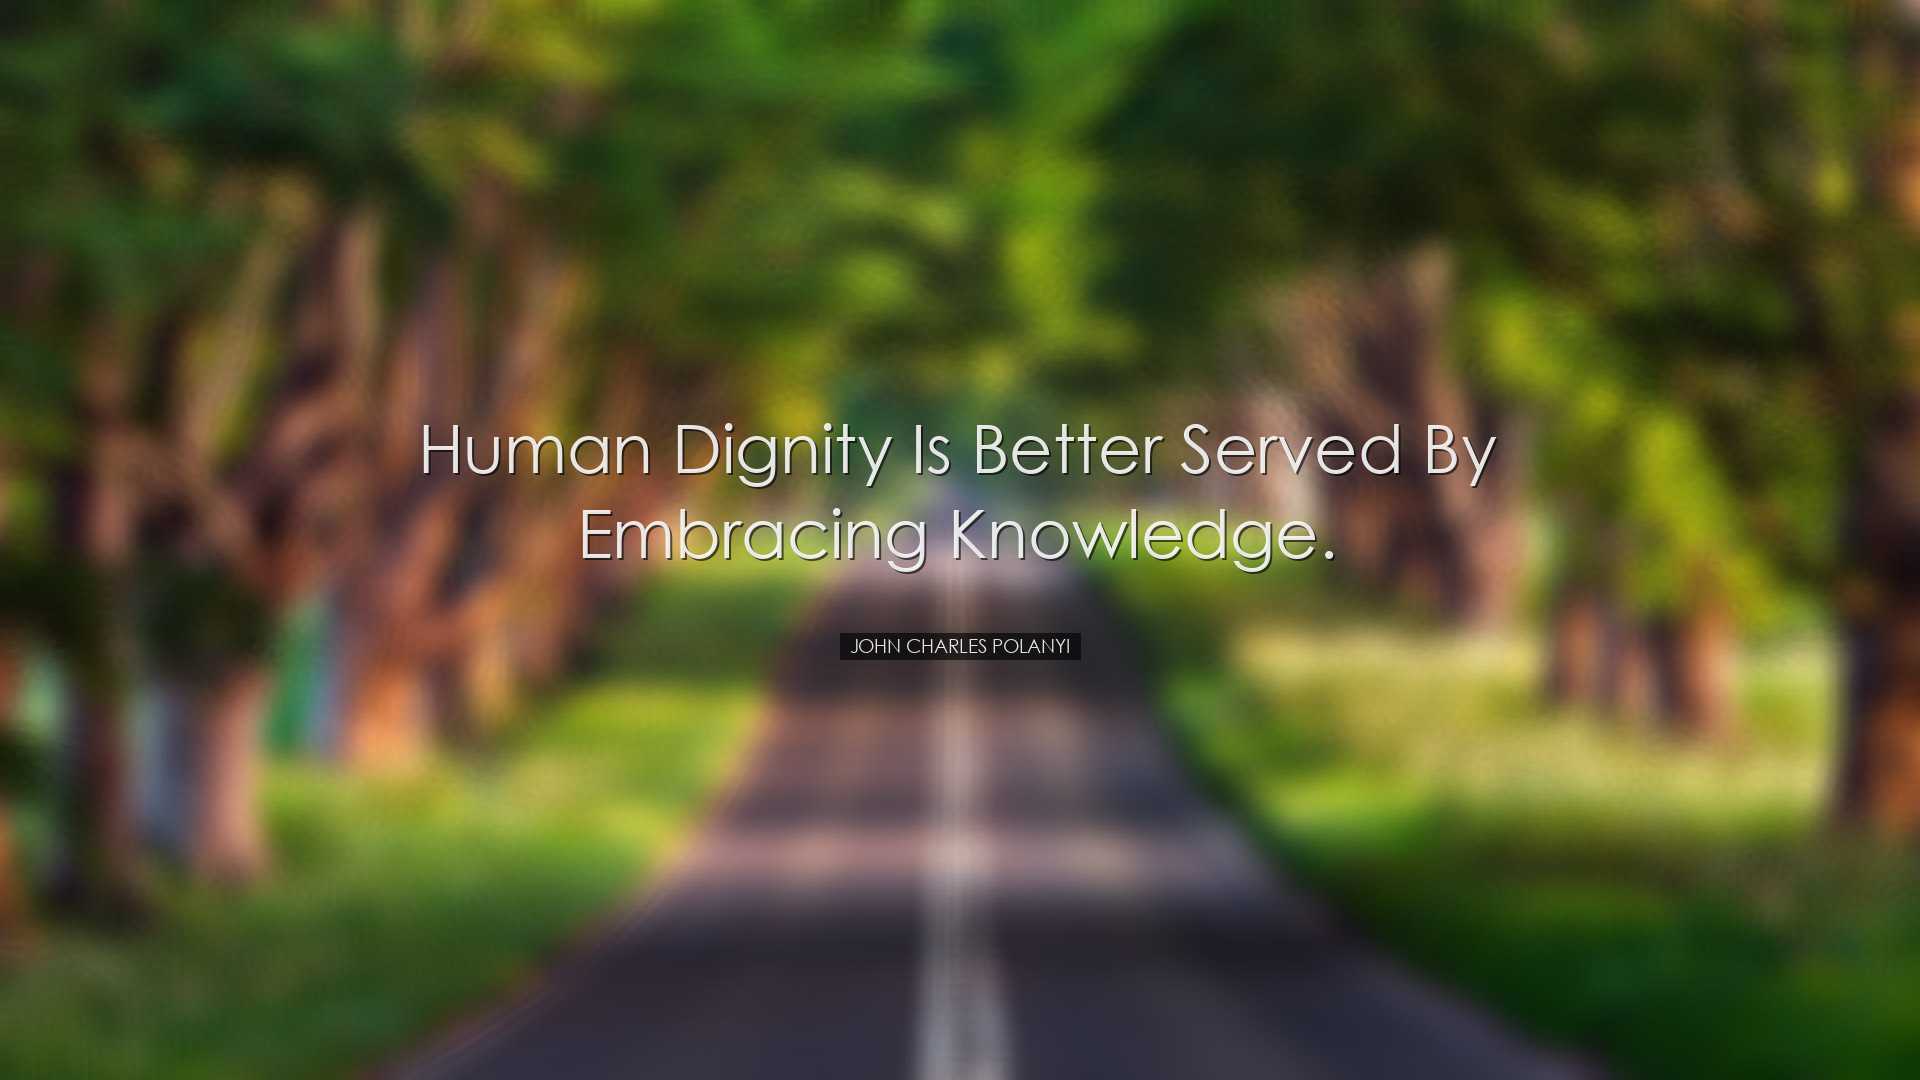 Human dignity is better served by embracing knowledge. - John Char